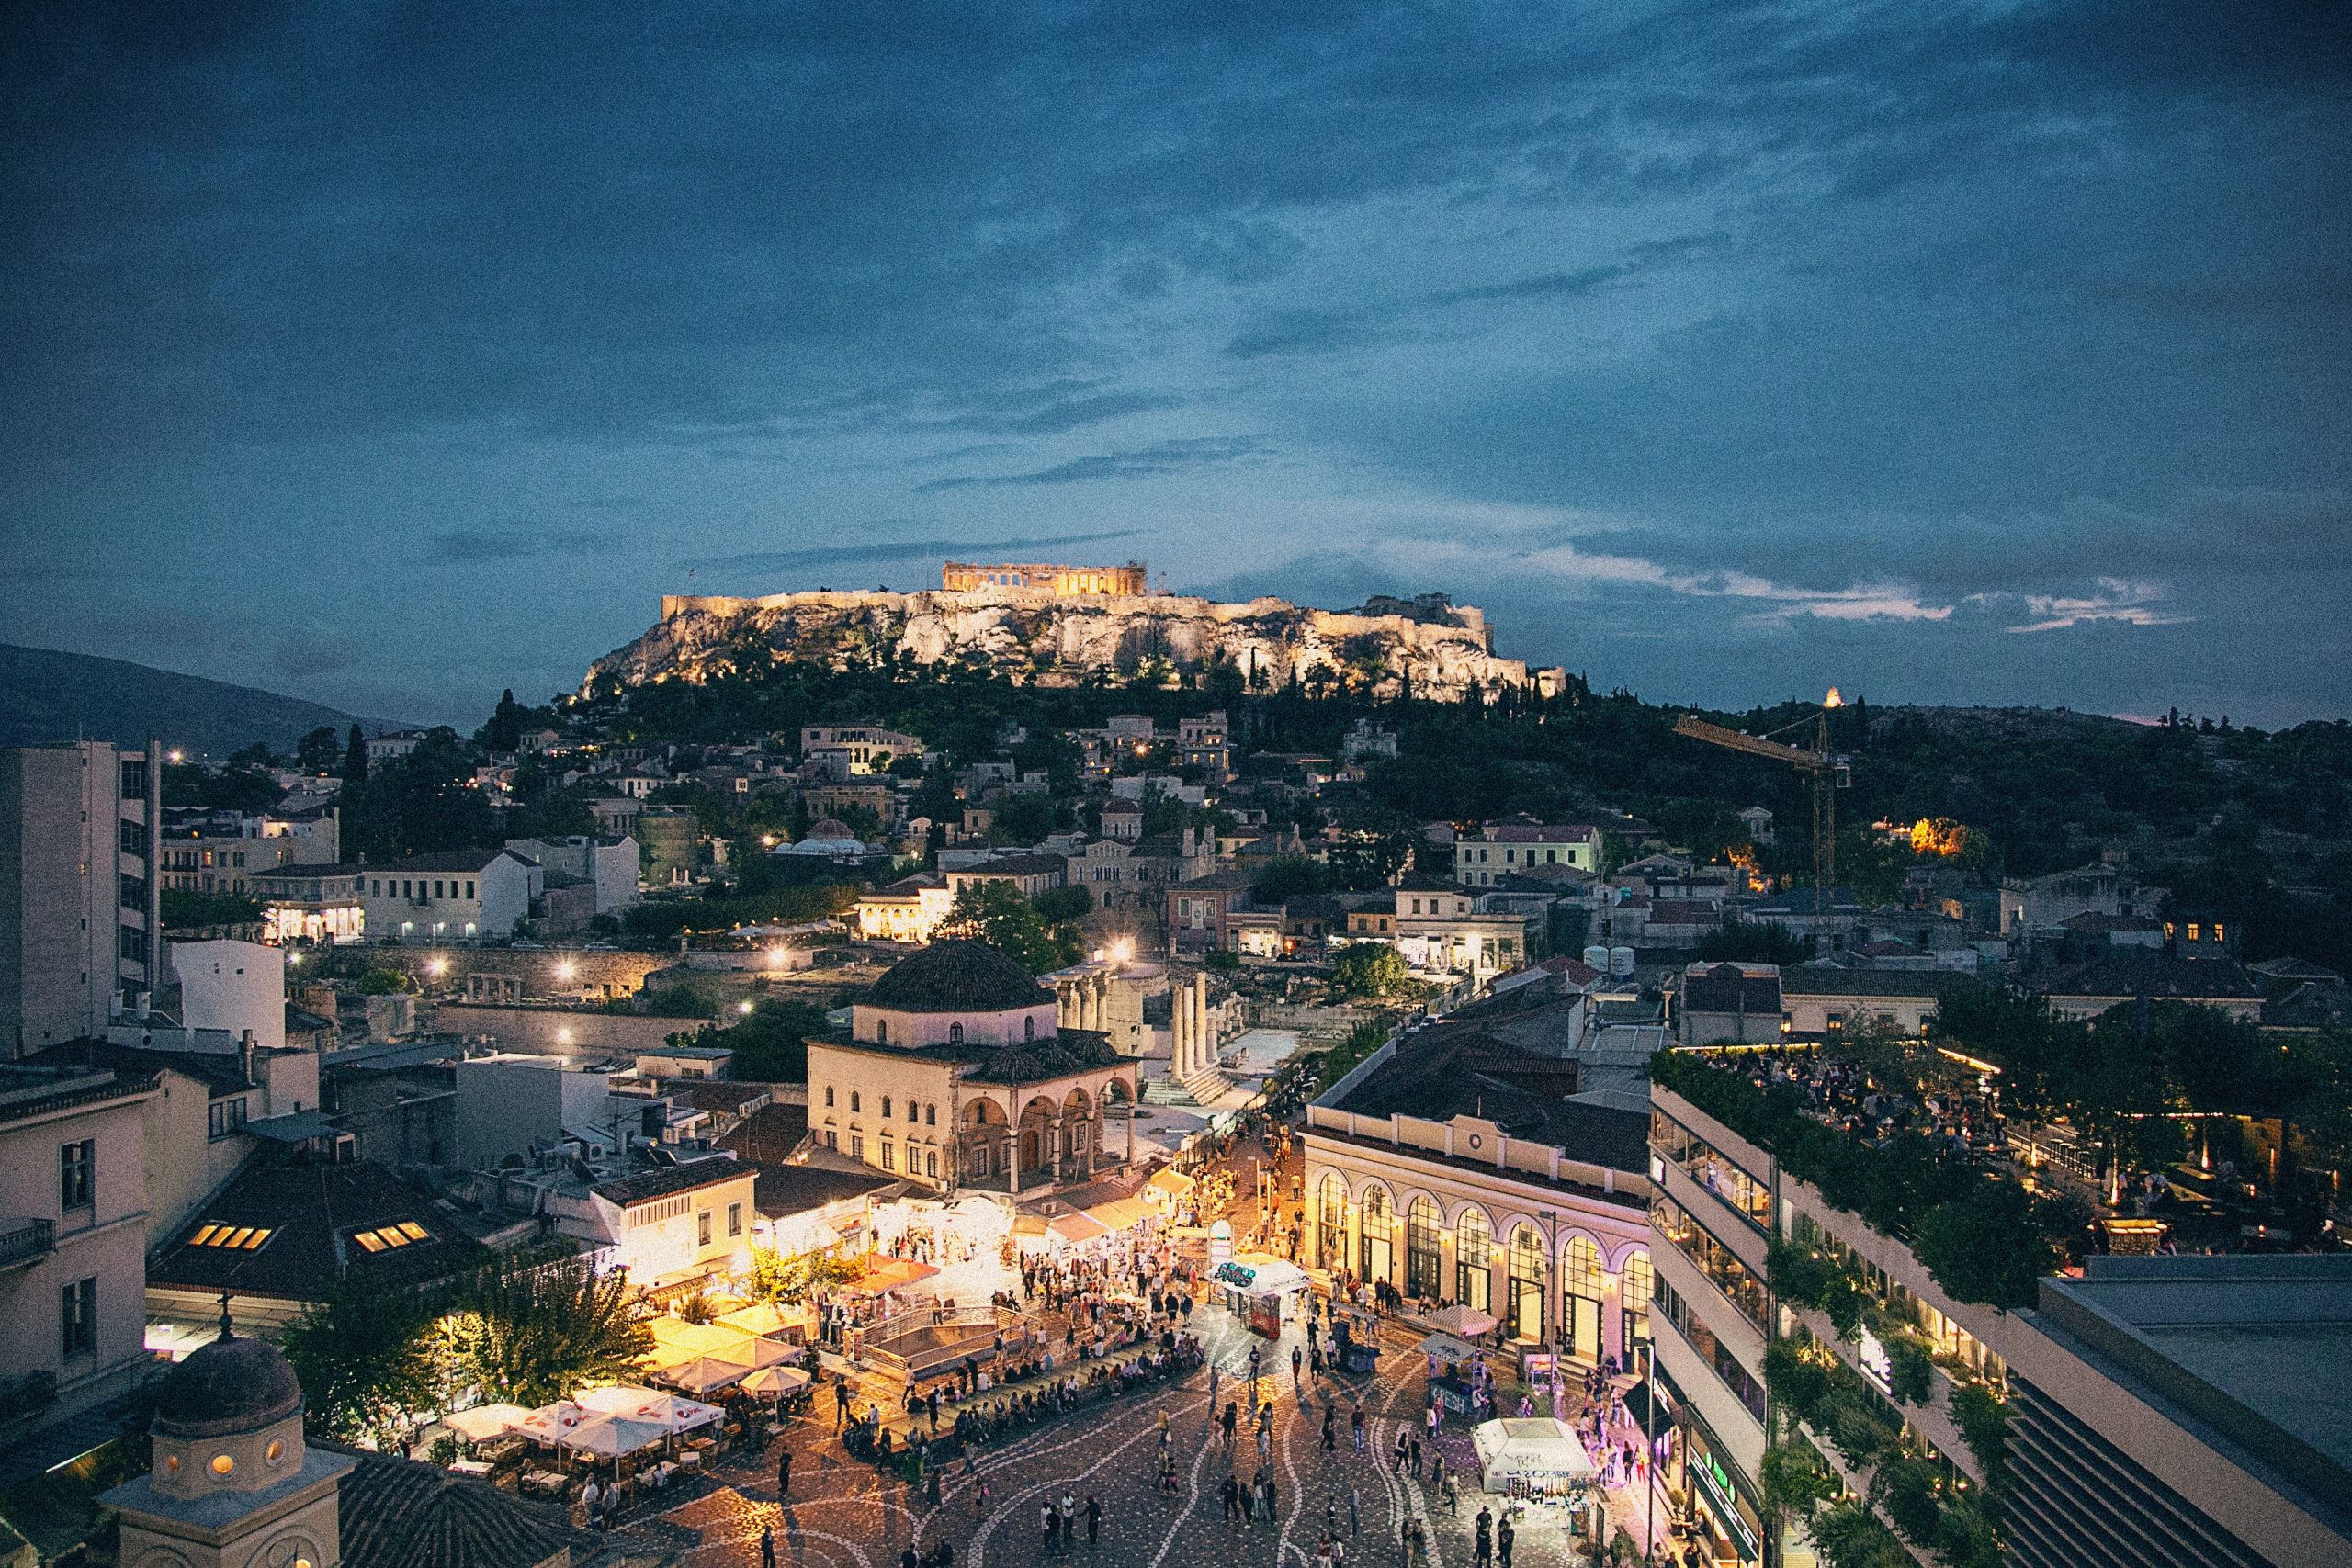 things to do in Athens